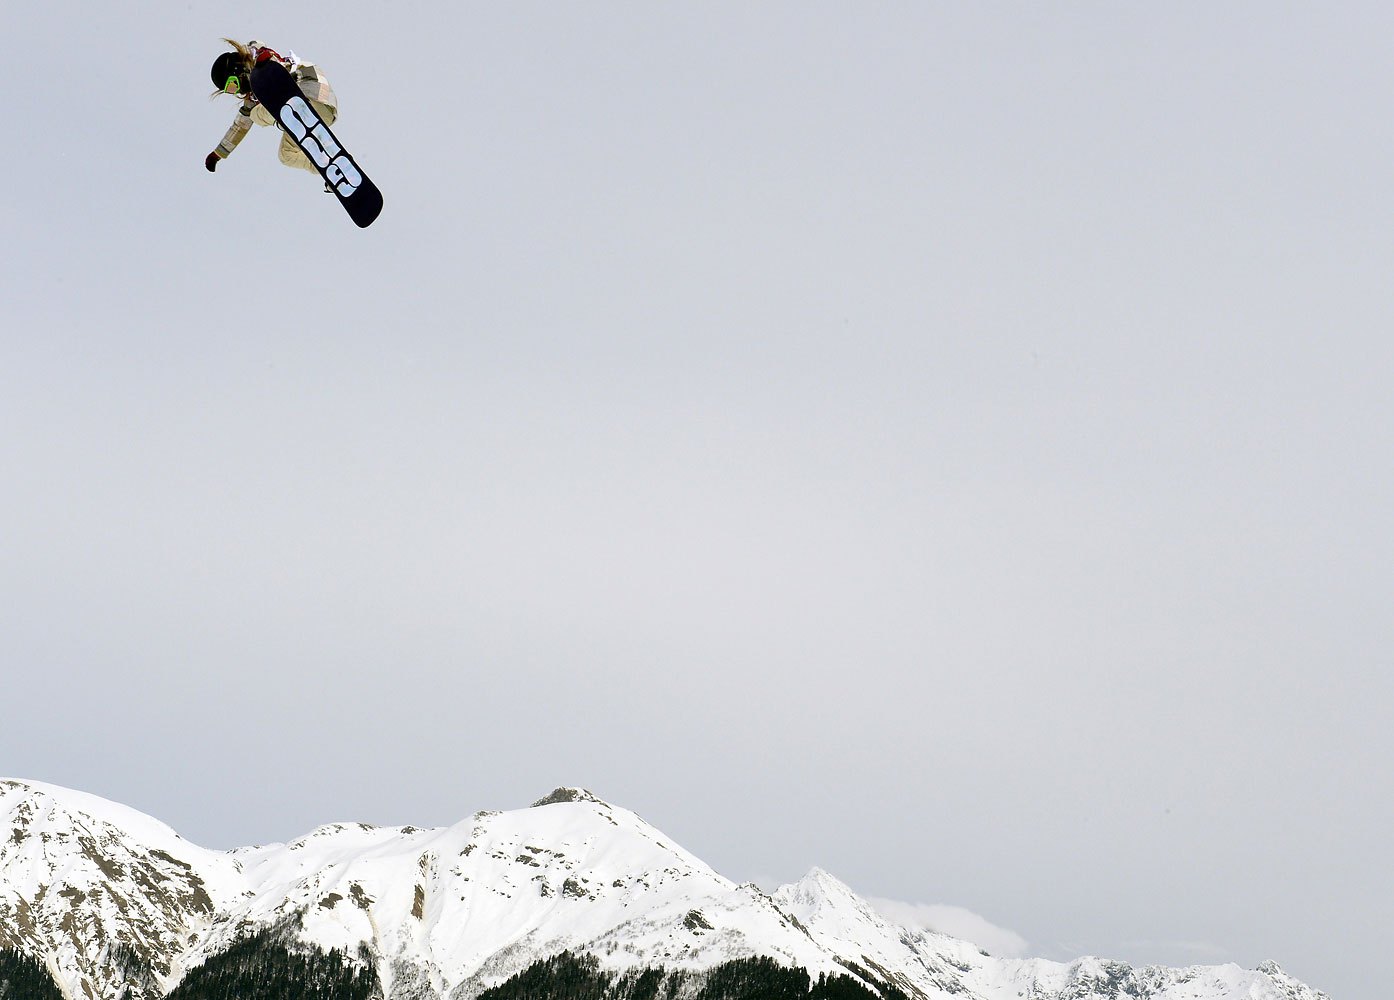 US Jamie Anderson competes in the Women's Snowboard Slopestyle Final at the Rosa Khutor Extreme Park on Feb. 9, 2014.